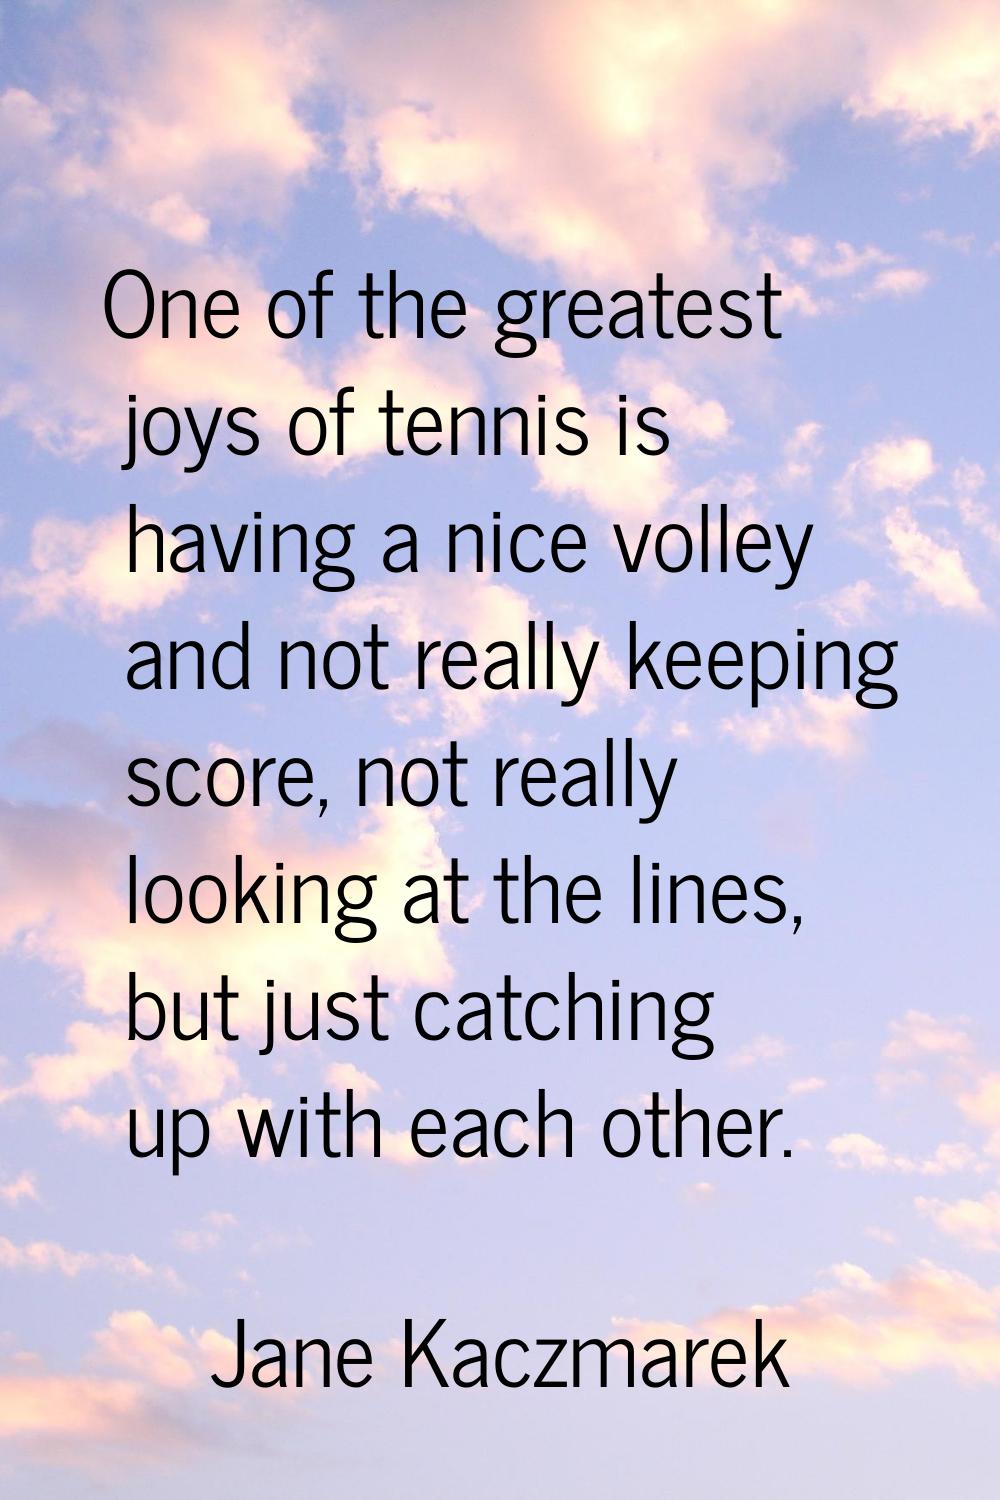 One of the greatest joys of tennis is having a nice volley and not really keeping score, not really